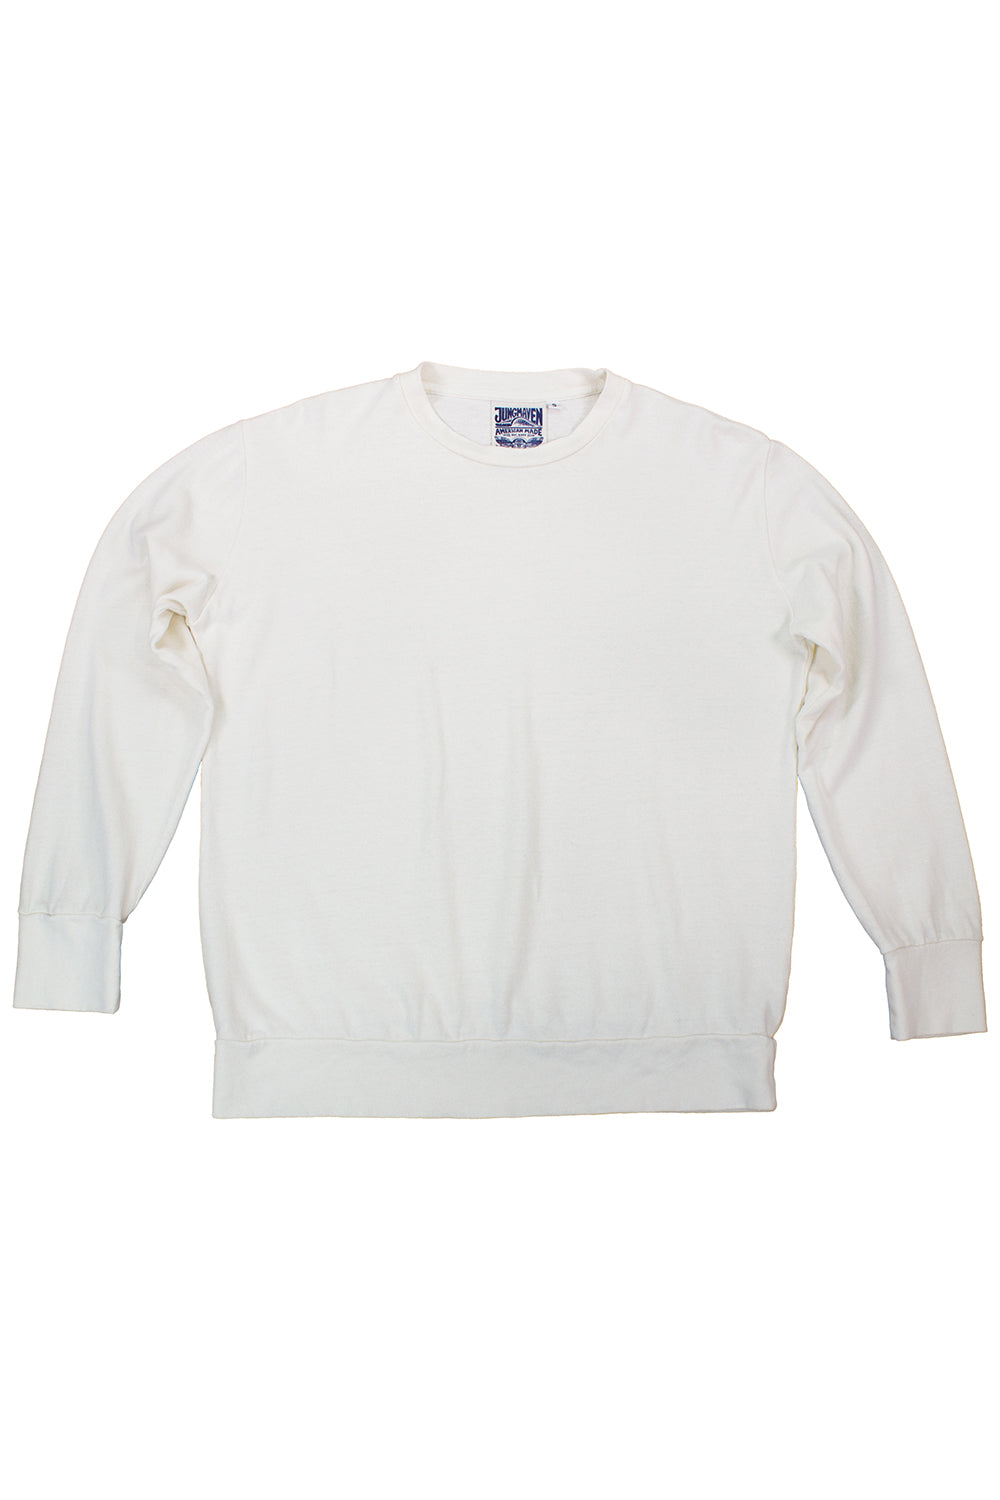 California Pullover | Jungmaven Hemp Clothing & Accessories / Color: Washed White